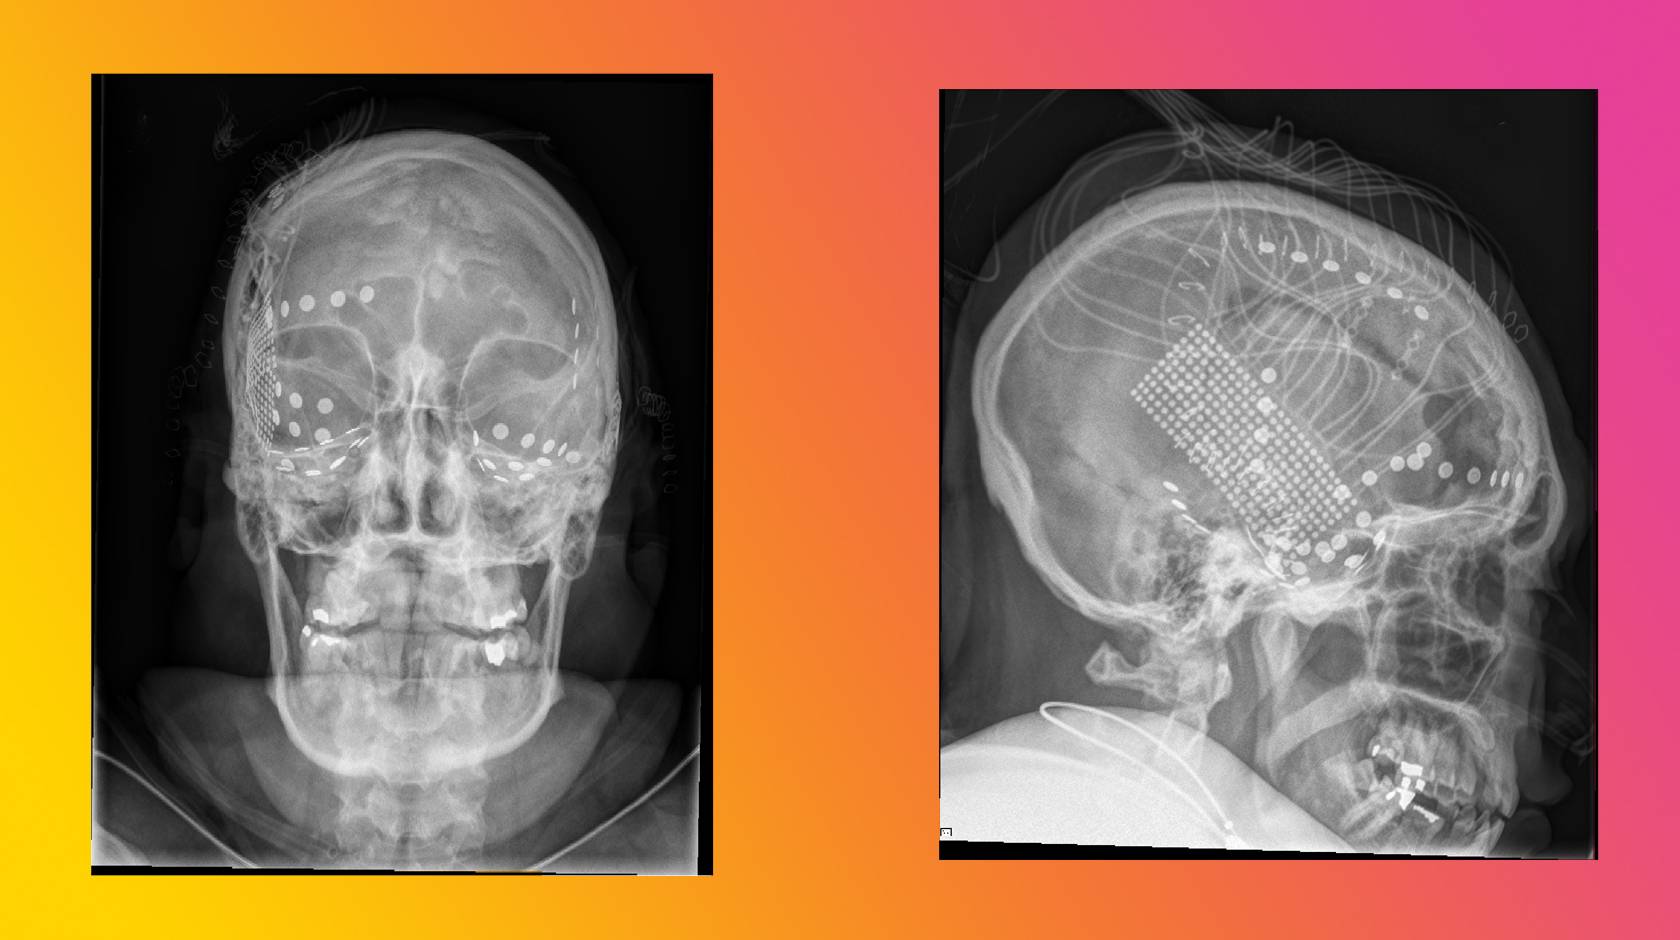 2 x-ray images of a human head showing electrodes attached to a brain